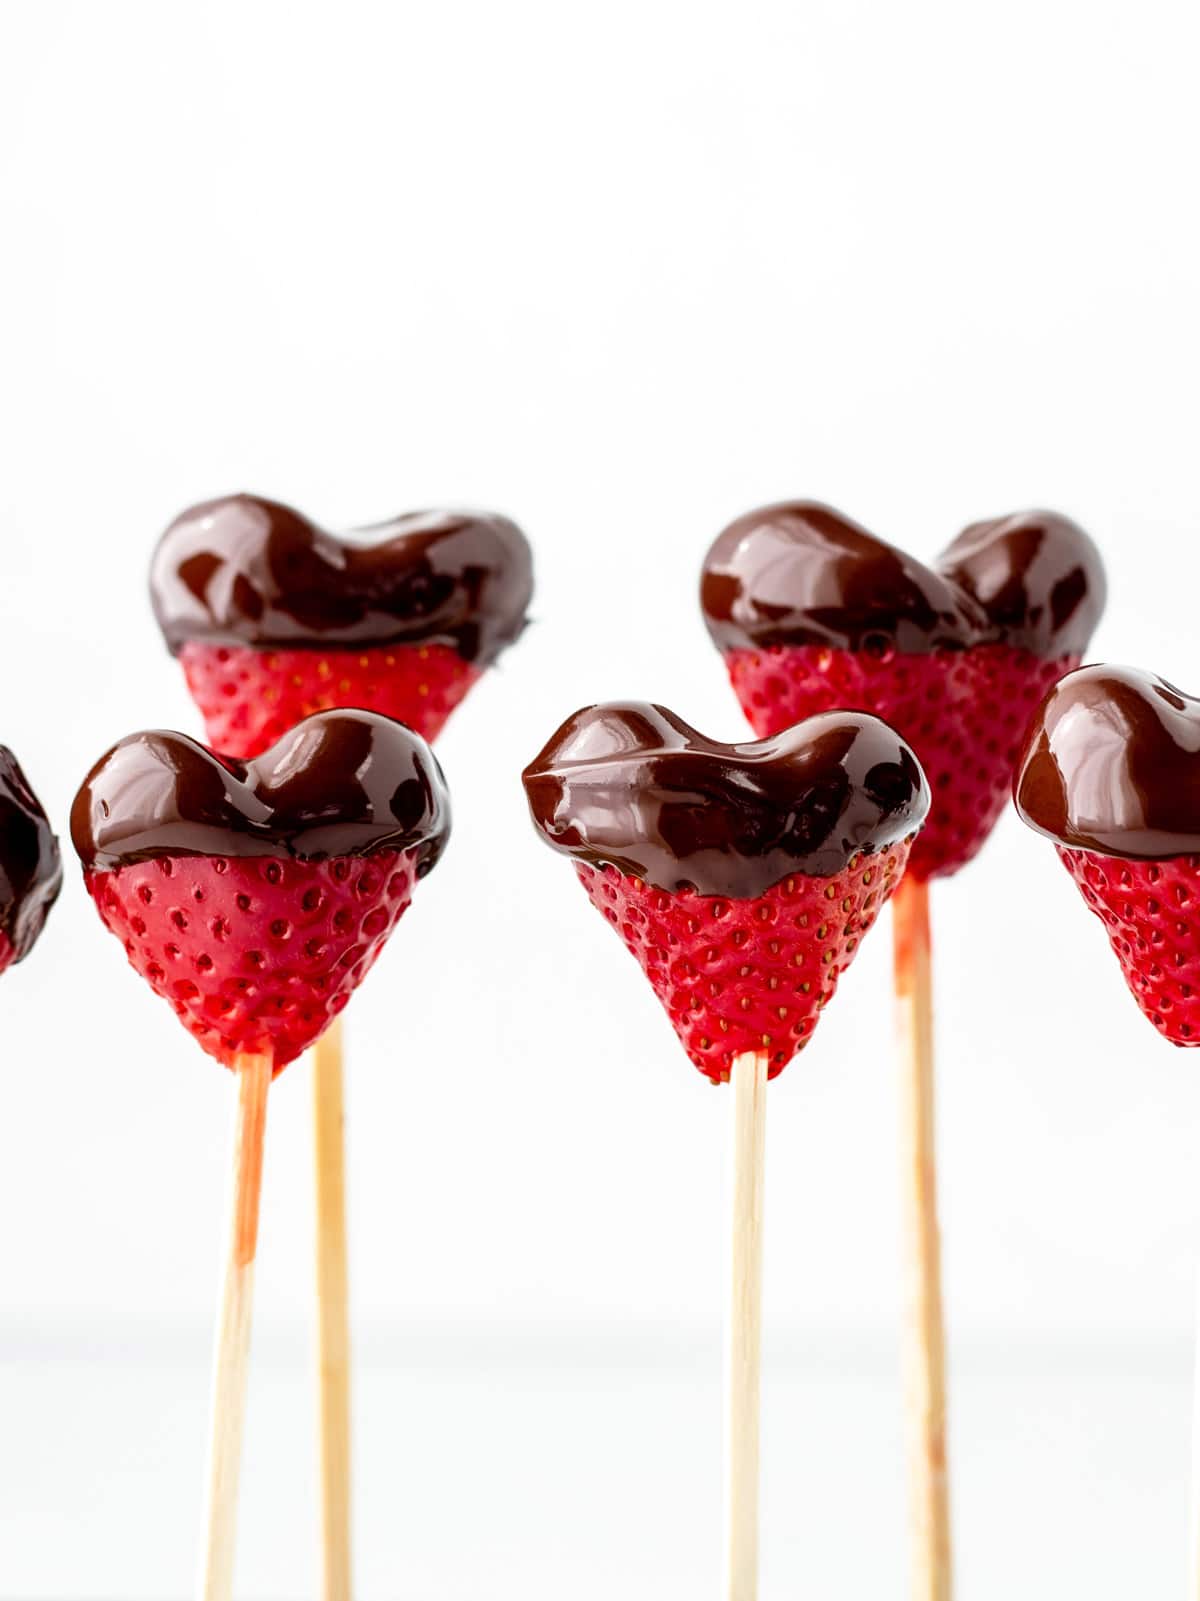 Chocolate covered strawberry hearts standing up on wooden skewers.